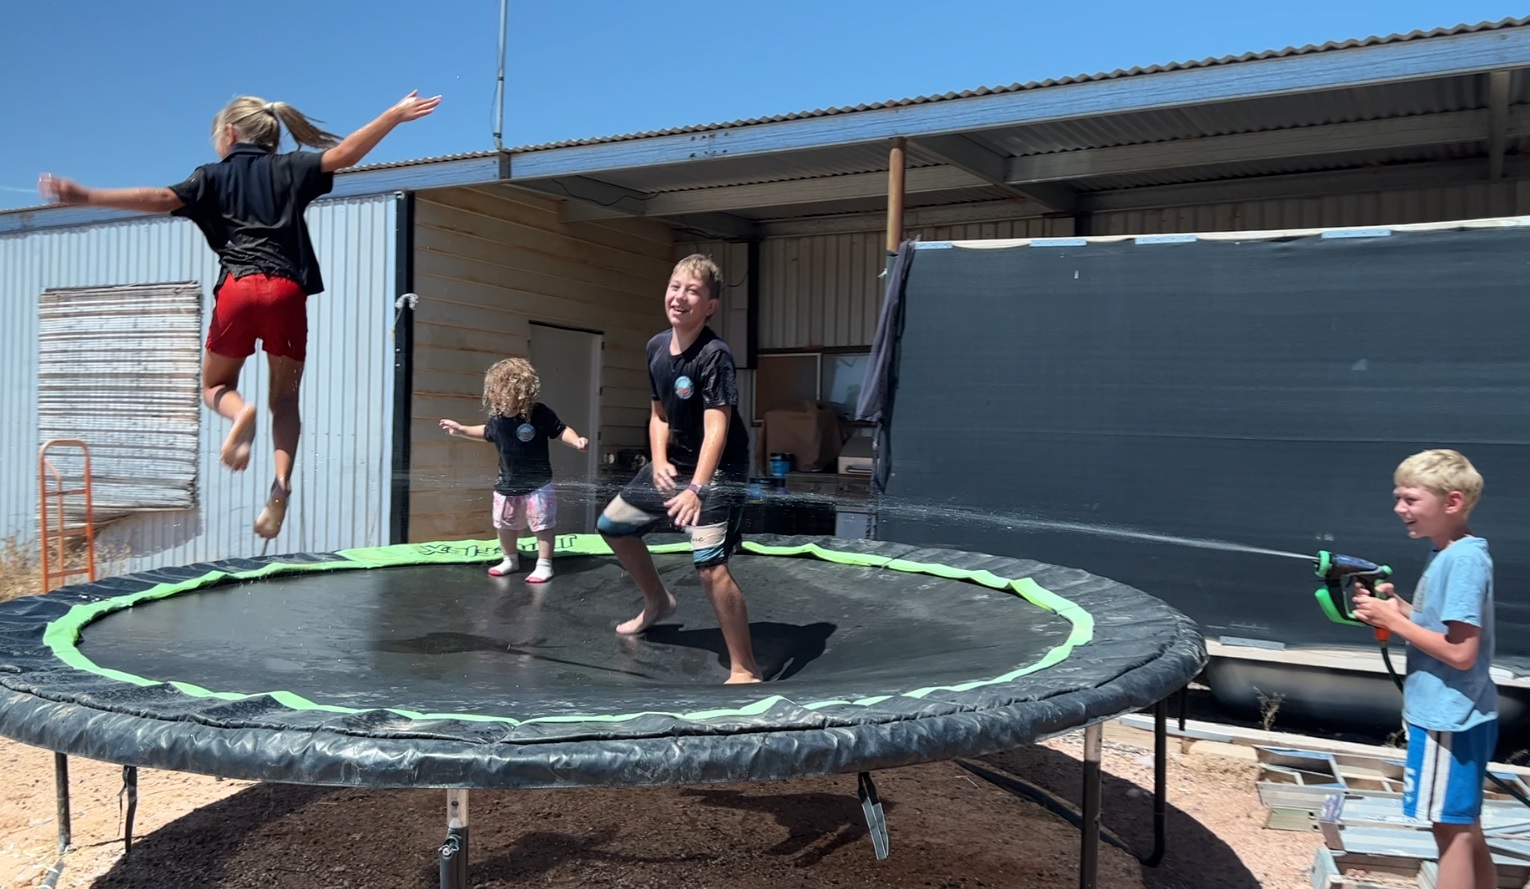 Four kids of varying ages play on a trampoline under a blue sky.